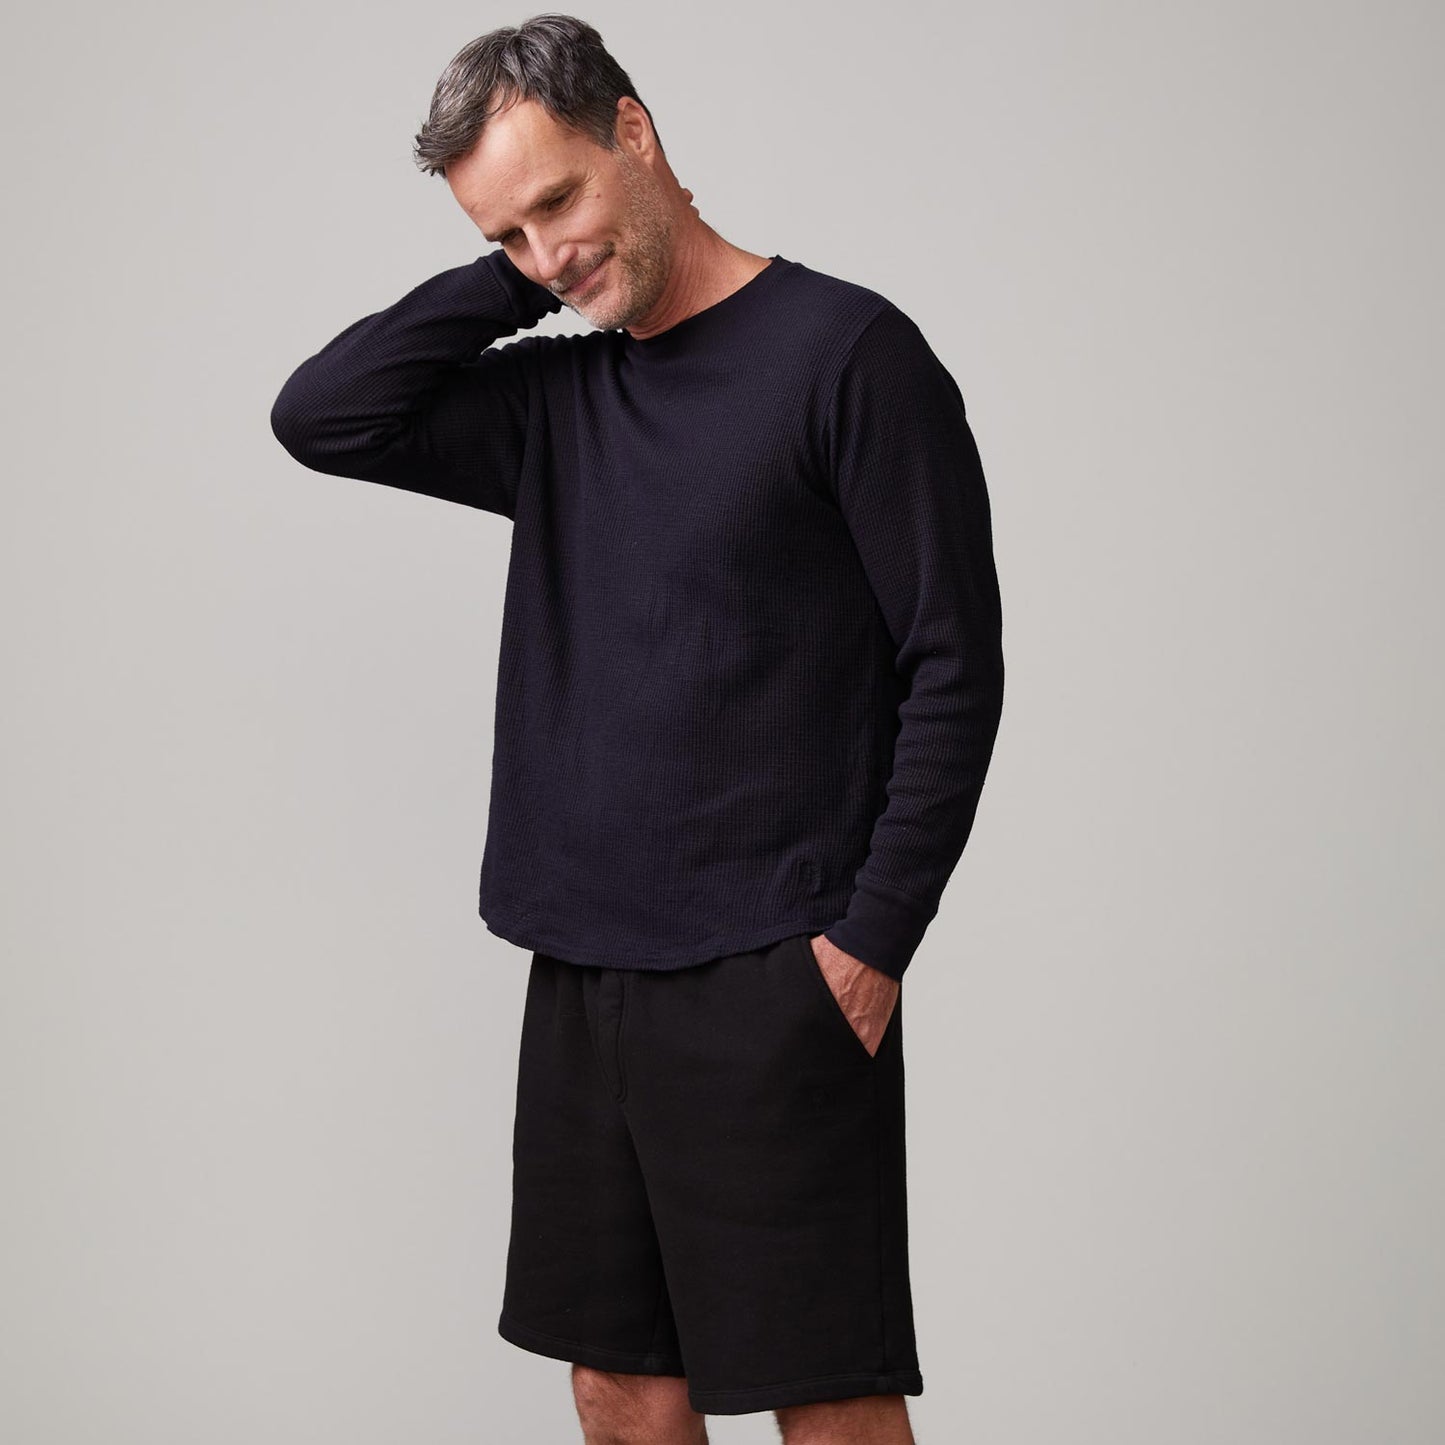 Side view of model wearing the thermal long sleeve crew in black.